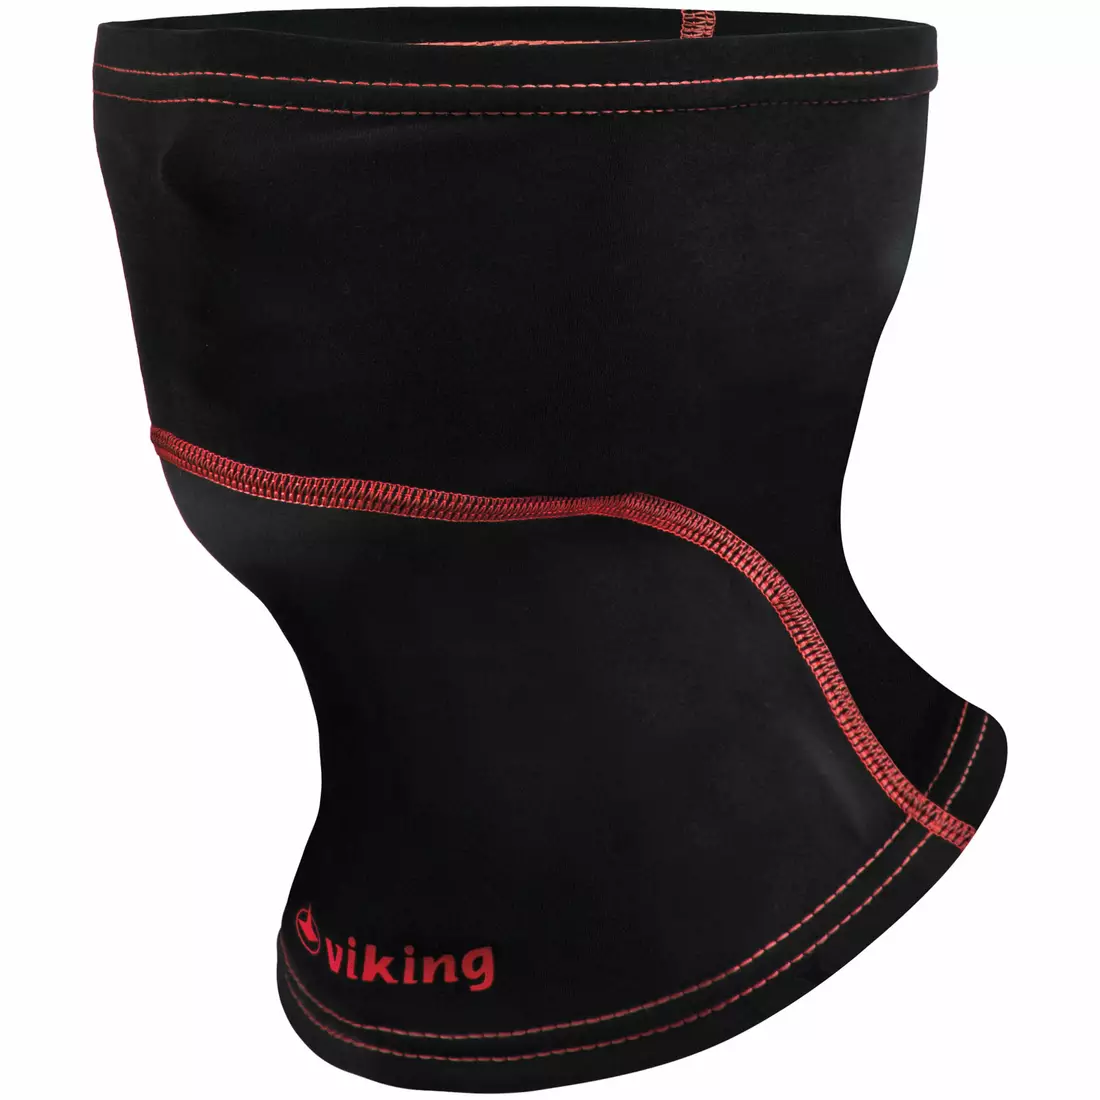 VIKING Gore Windstopper mask tube collar 290/17/2004-34 Parker black with red stitching